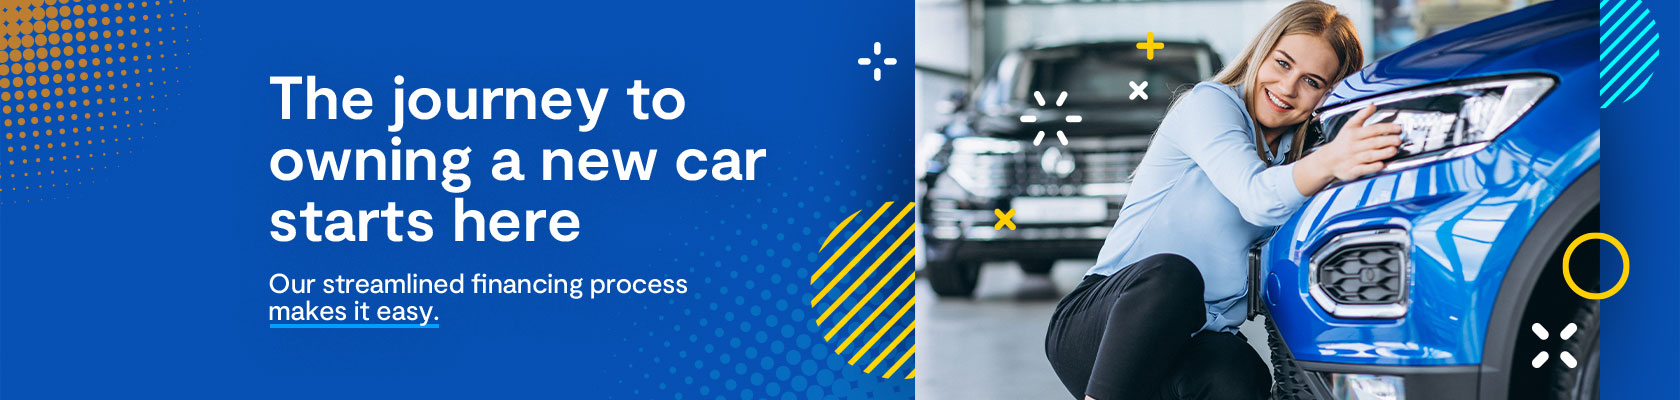 The journey to owning a new car starts here. Our streamlined financing process makes it easy. 